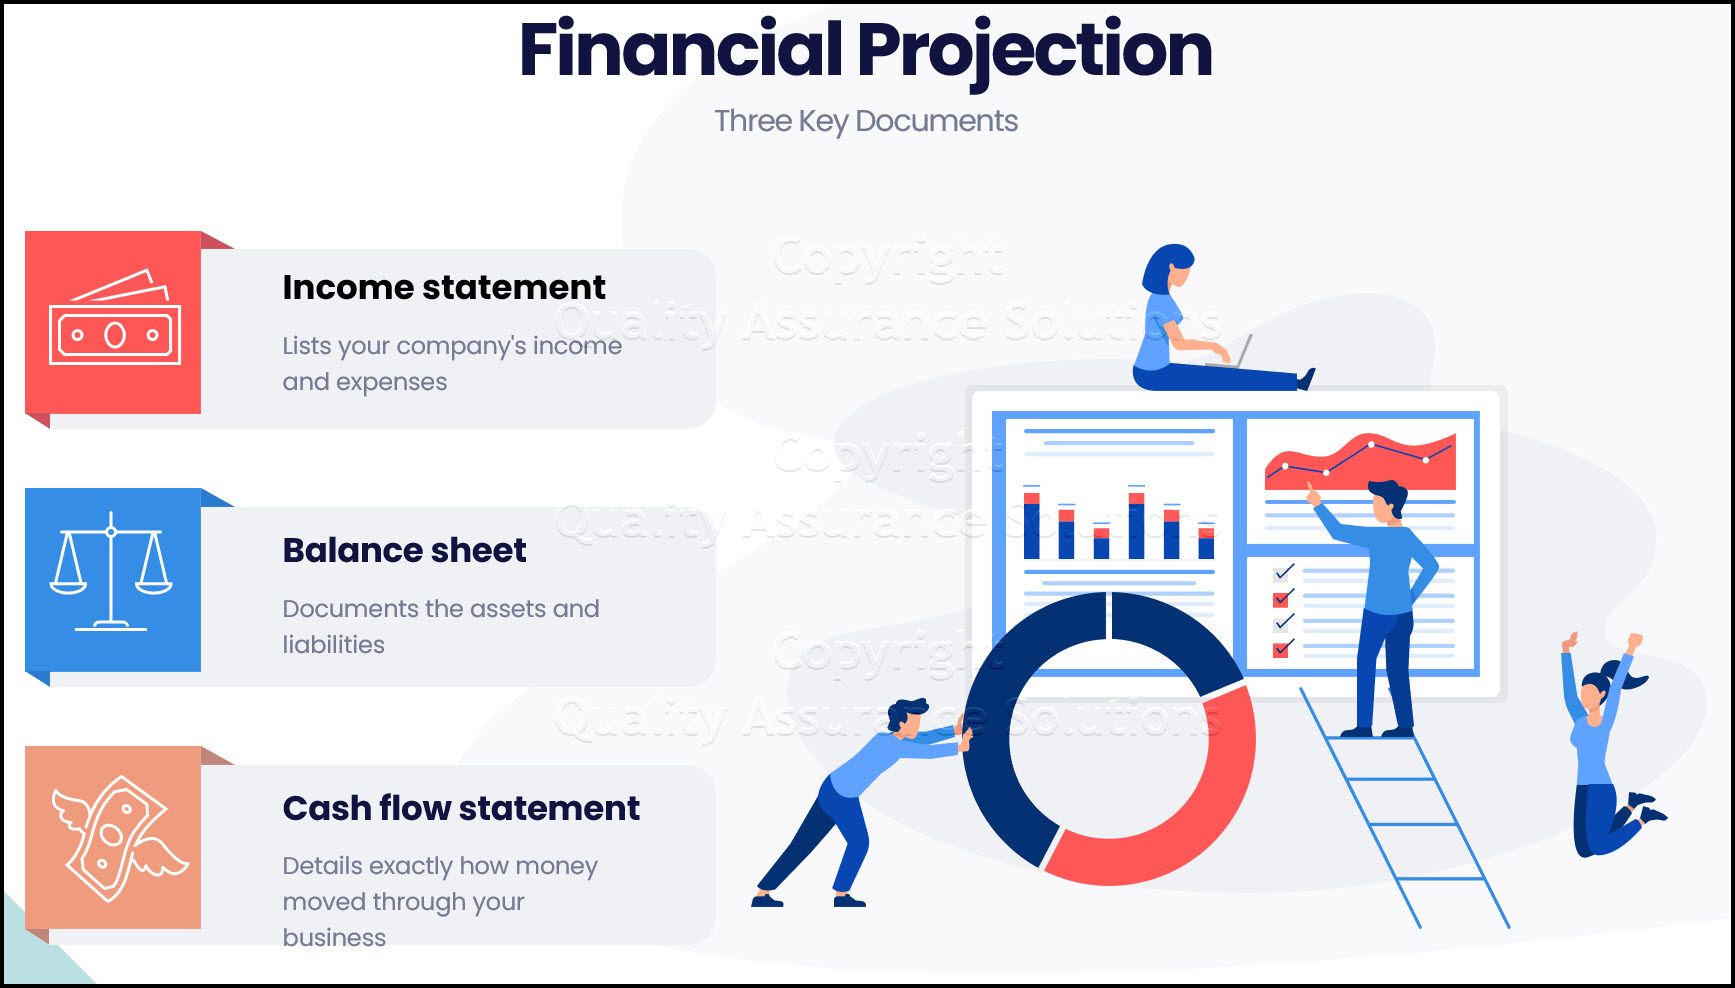 financial projection in business plan is about